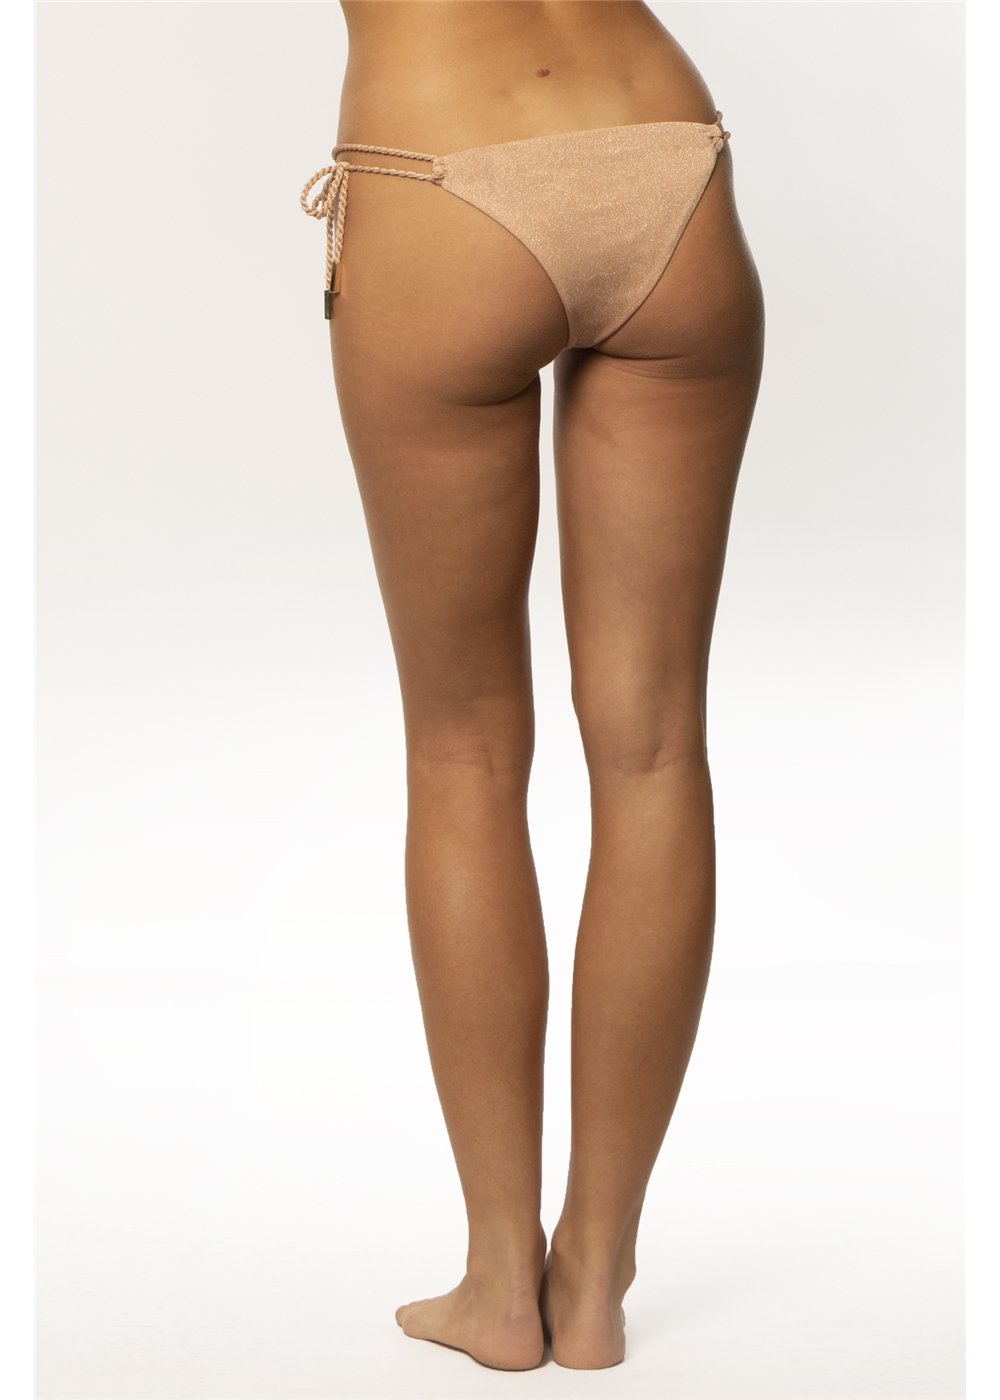 Amuse Society Women's Solid Oasis Skimpy Bottom in Toffee. Back view